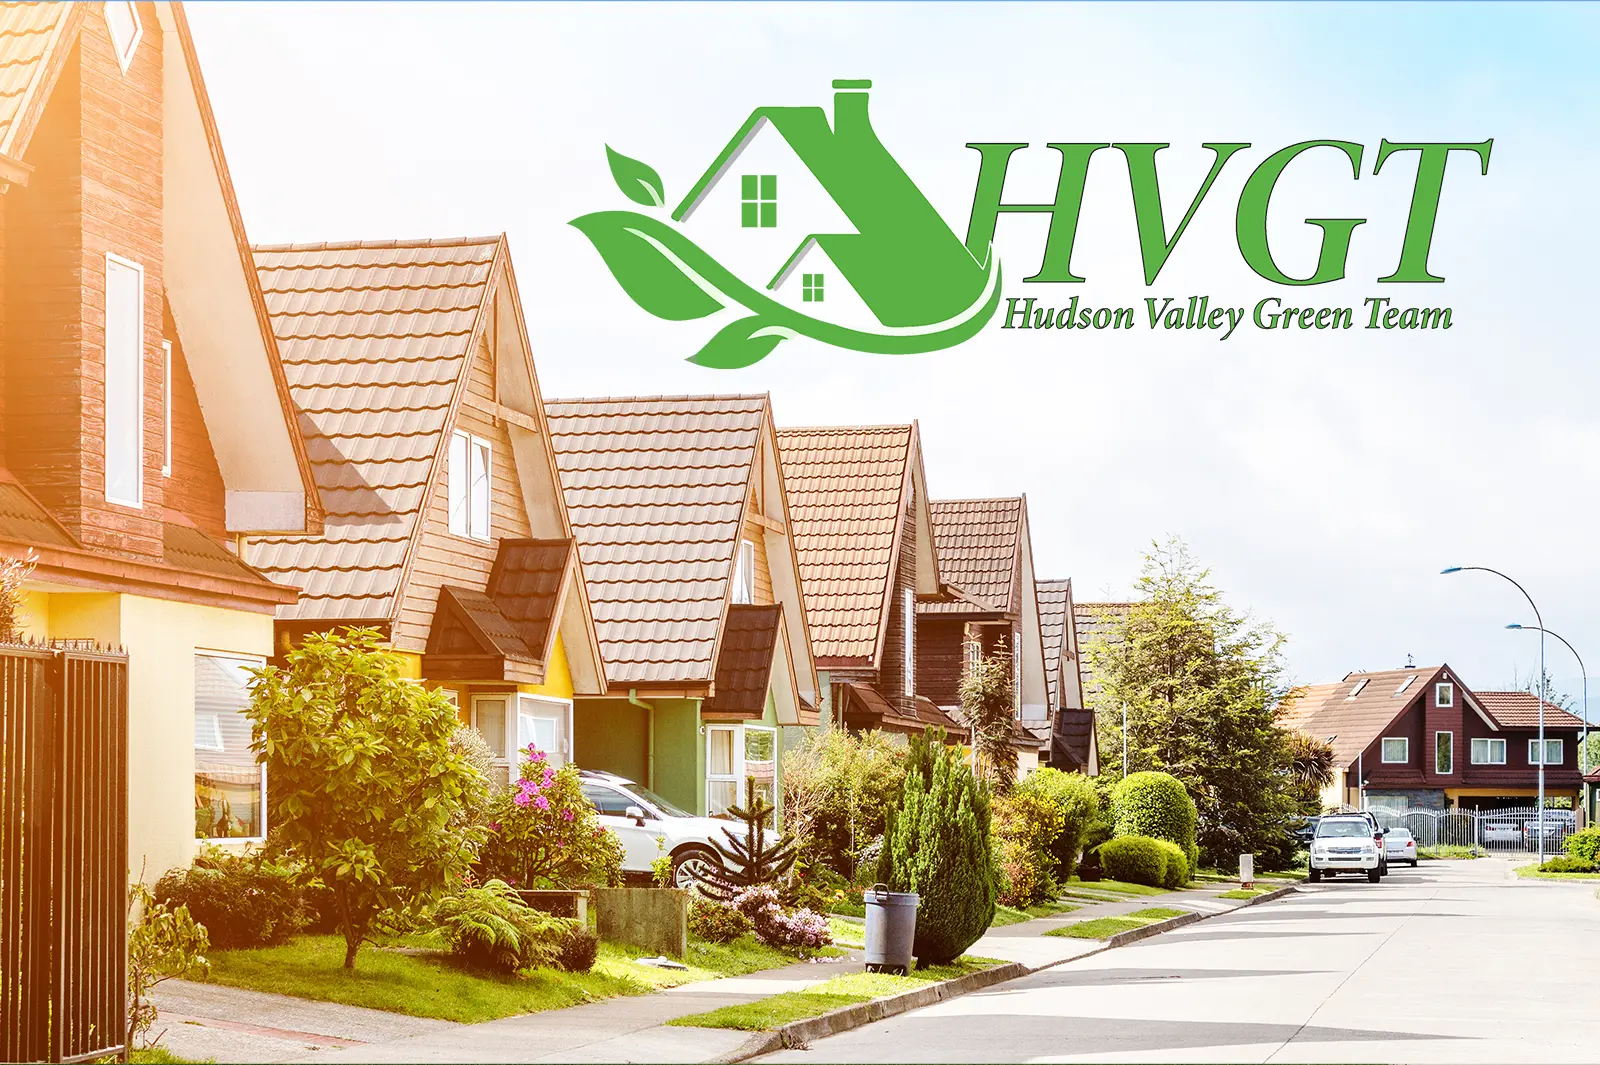 Community of houses in a row, with pointed roofs and a front garden. The image has an Hudson Valley Green Team logo placed on top.